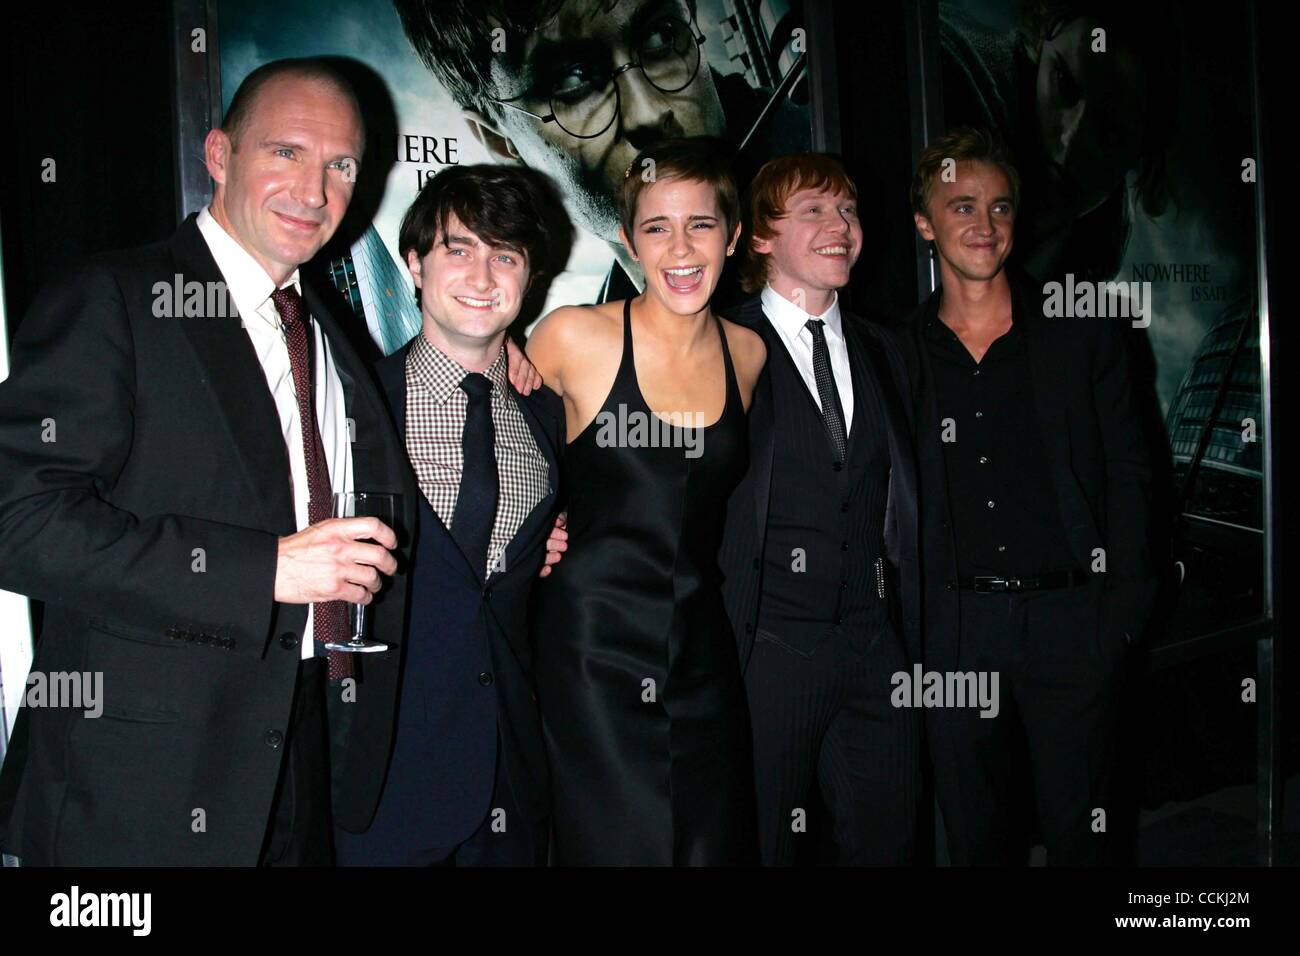 Nov. 15, 2010 - New York, New York, U.S. - RALPH FIENNES DANIEL RADCLIFFE, EMMA WATSON, RUPERT GRINT AND TOM FELTON arrive for the premiere of ''Harry Potter and the Deathly Hallows Part I'' at Alice Tully Hall at Lincoln Center in New York on November 15, 2010... K66806SN(Credit Image: © Sharon Nee Stock Photo